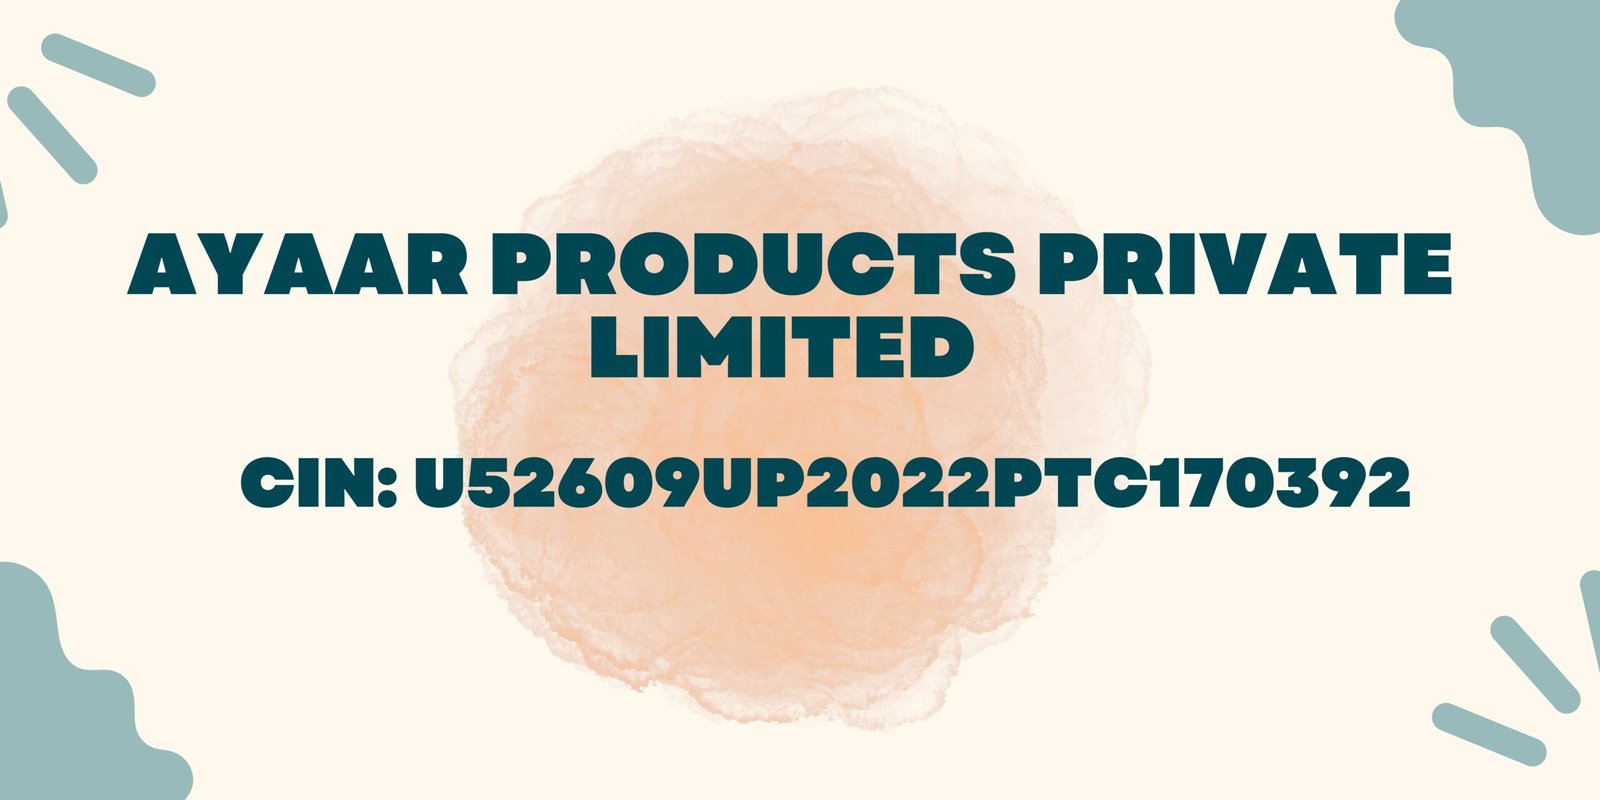 Ayaar Products Private Limited